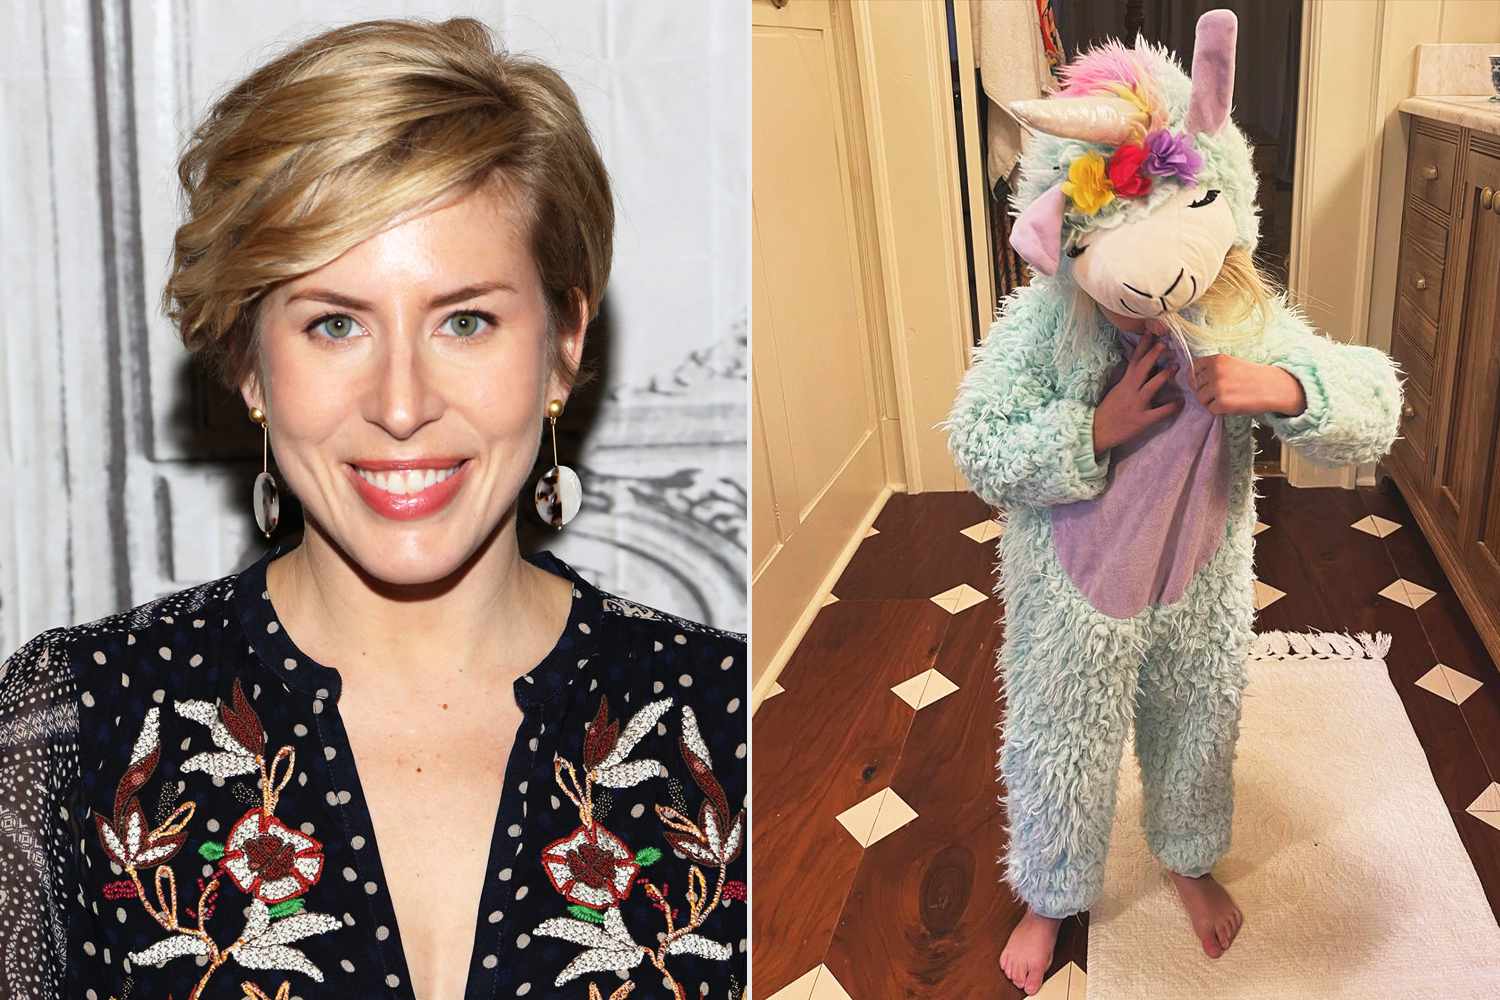 Erin Napier Mourns Daughter 'Losing Her Babyness' as She Wears Her Unicorn Costume for the Last Time